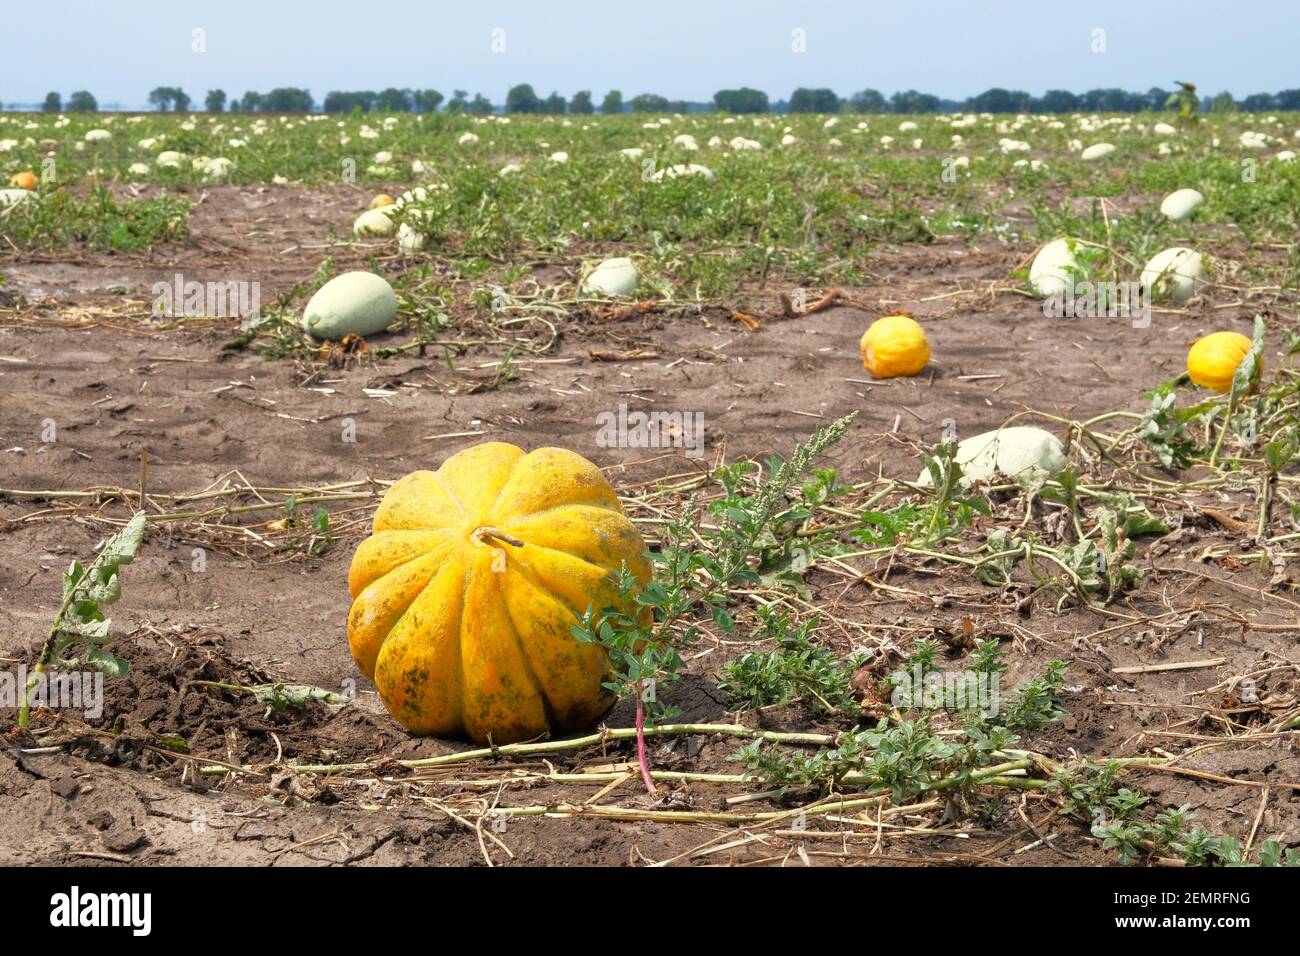 Melon ripened on a farm field. Healthy eating. Autumn harvest, juicy and ripe yellow melons. Stock Photo